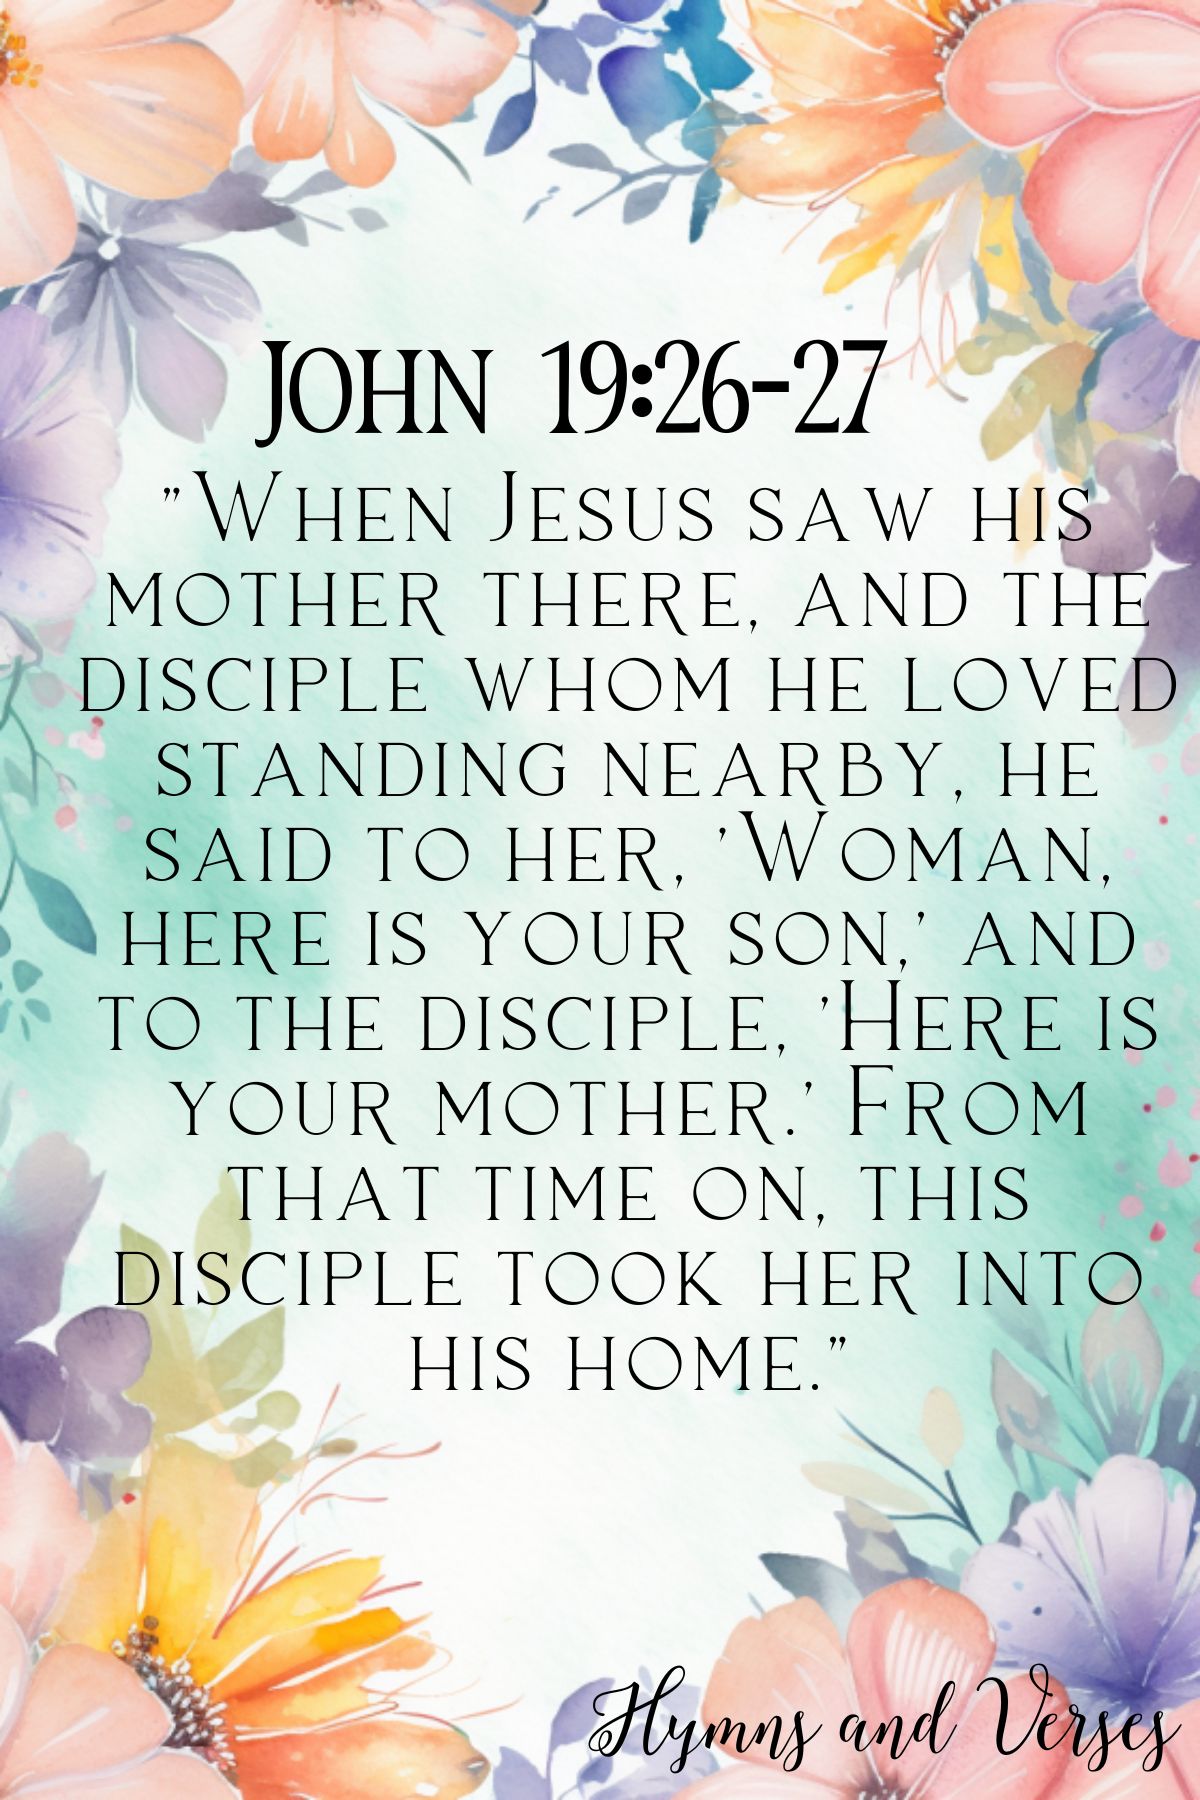 John 19:26-27 bible verse for mothers birthday with pretty floral background